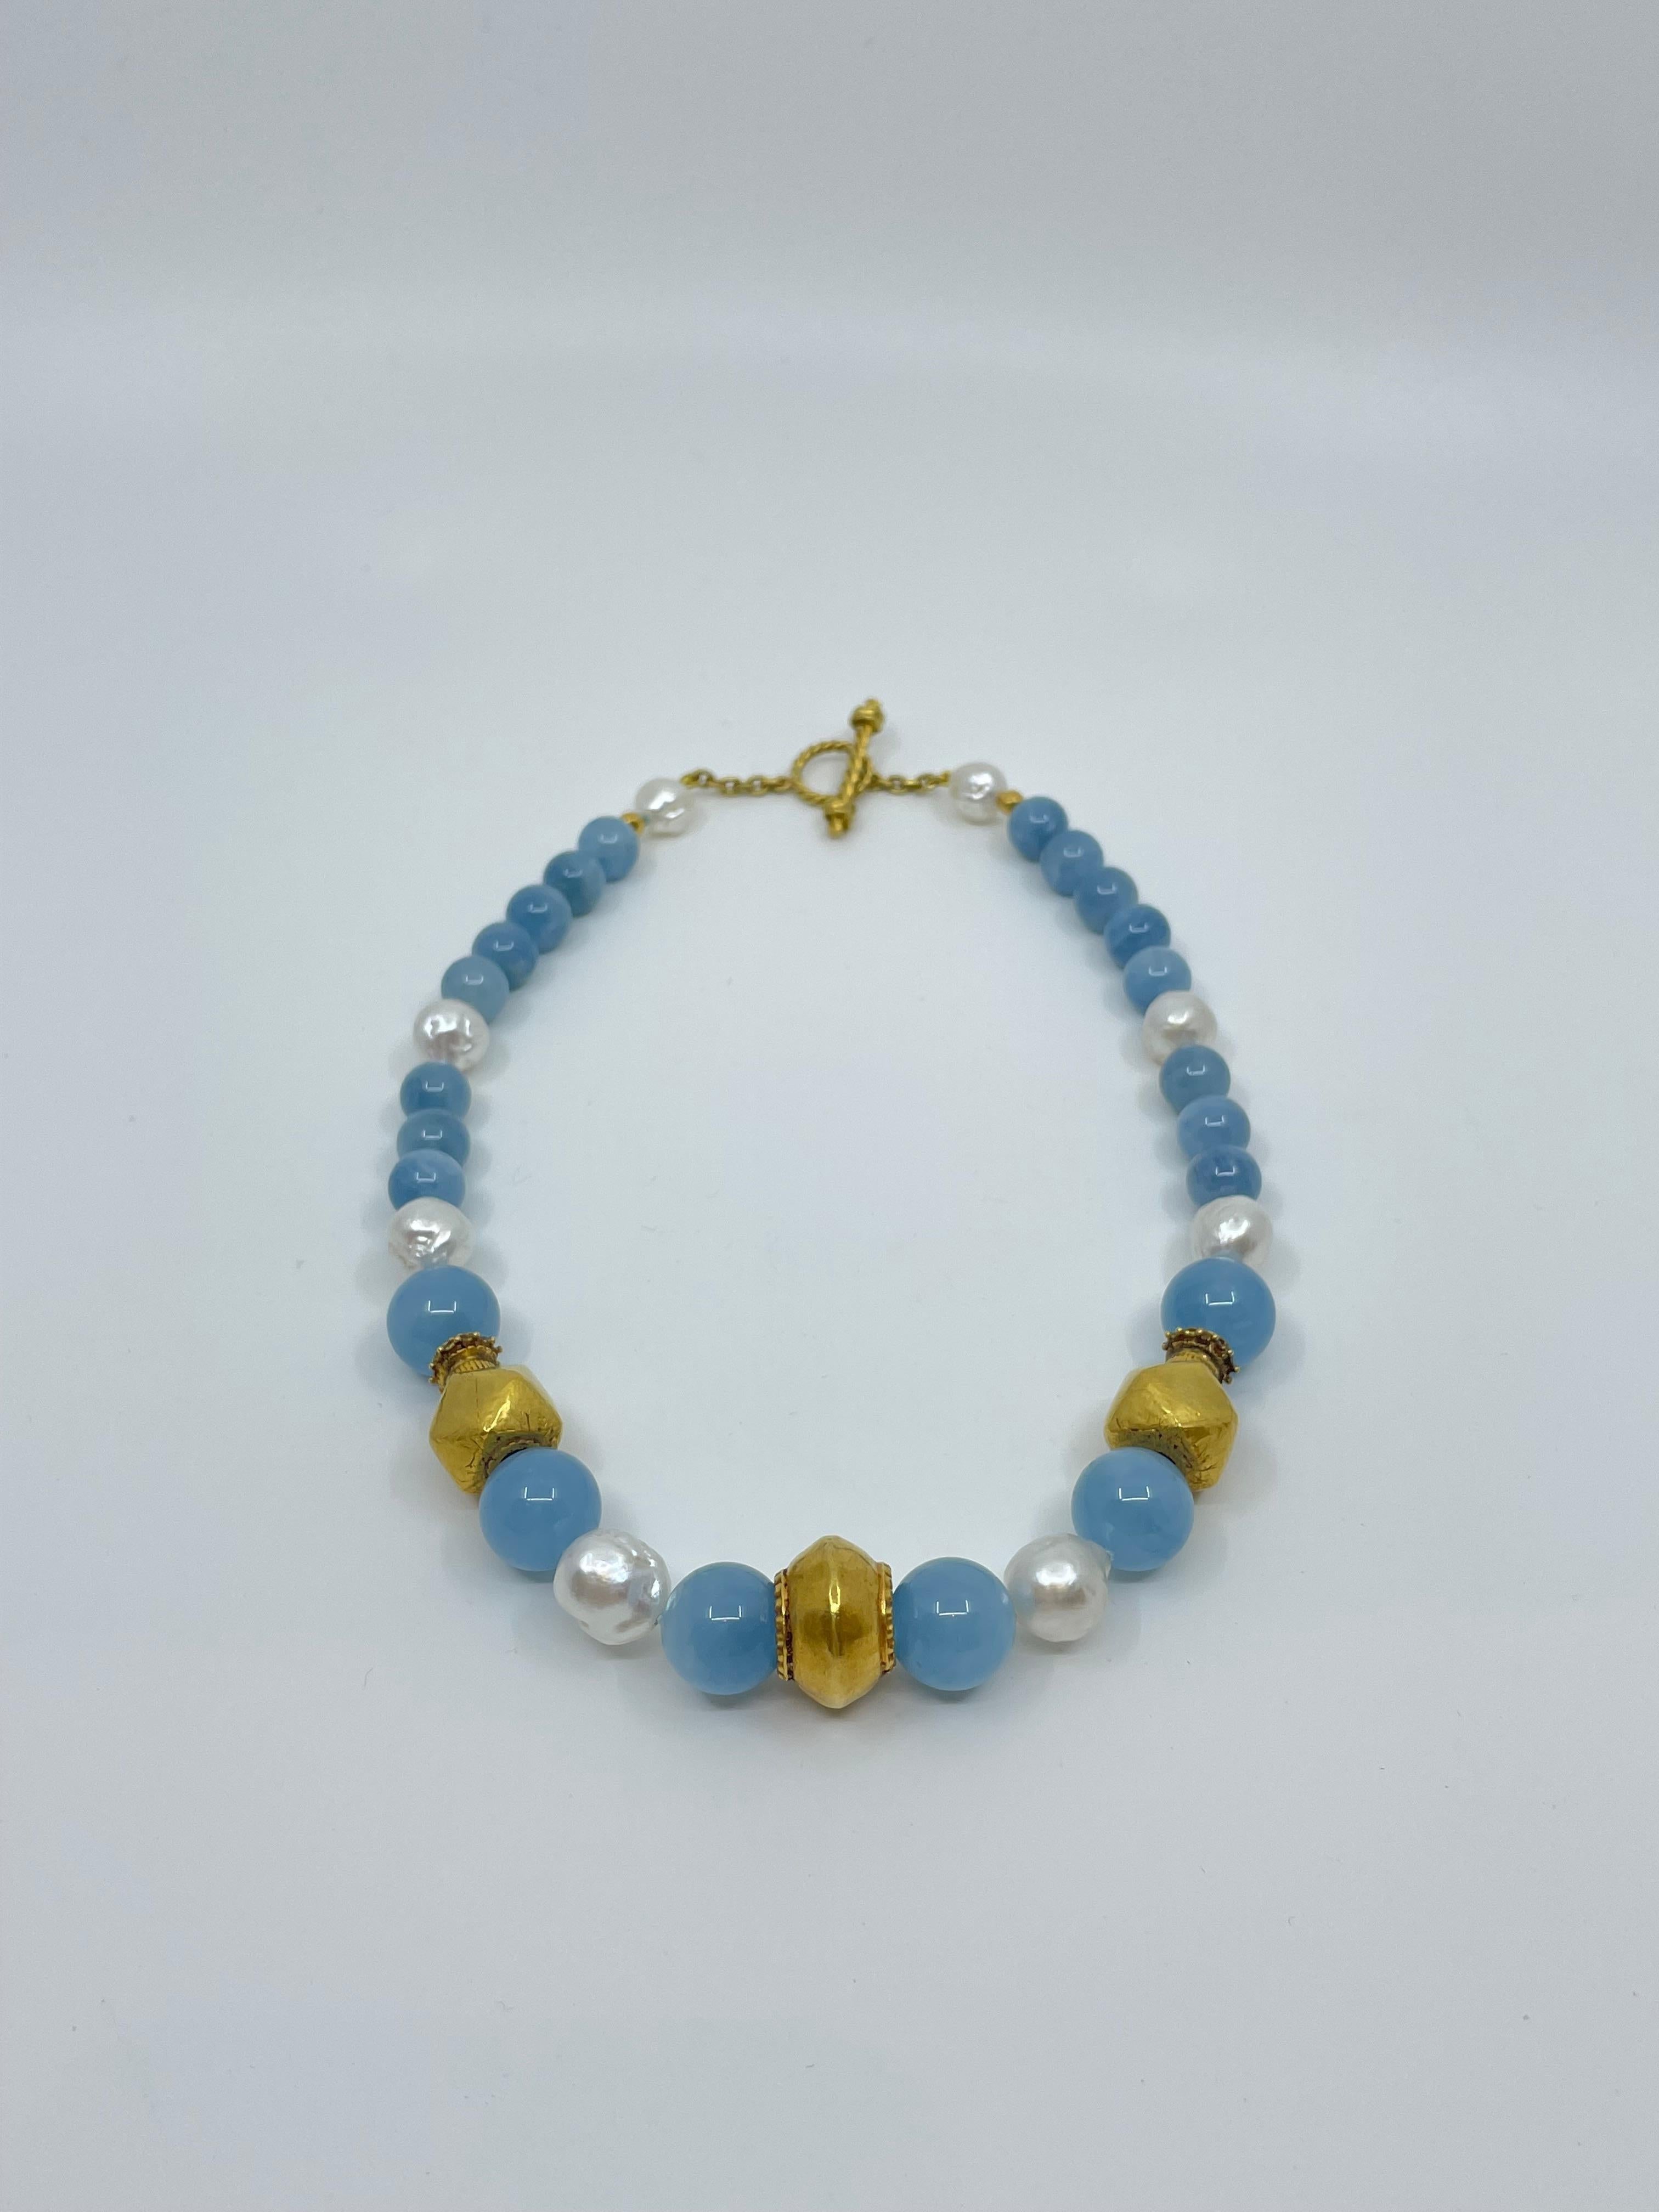 Necklace with Aquamarine, South Sea Pearls, Gold & 18K Solid Gold Beads For Sale 2